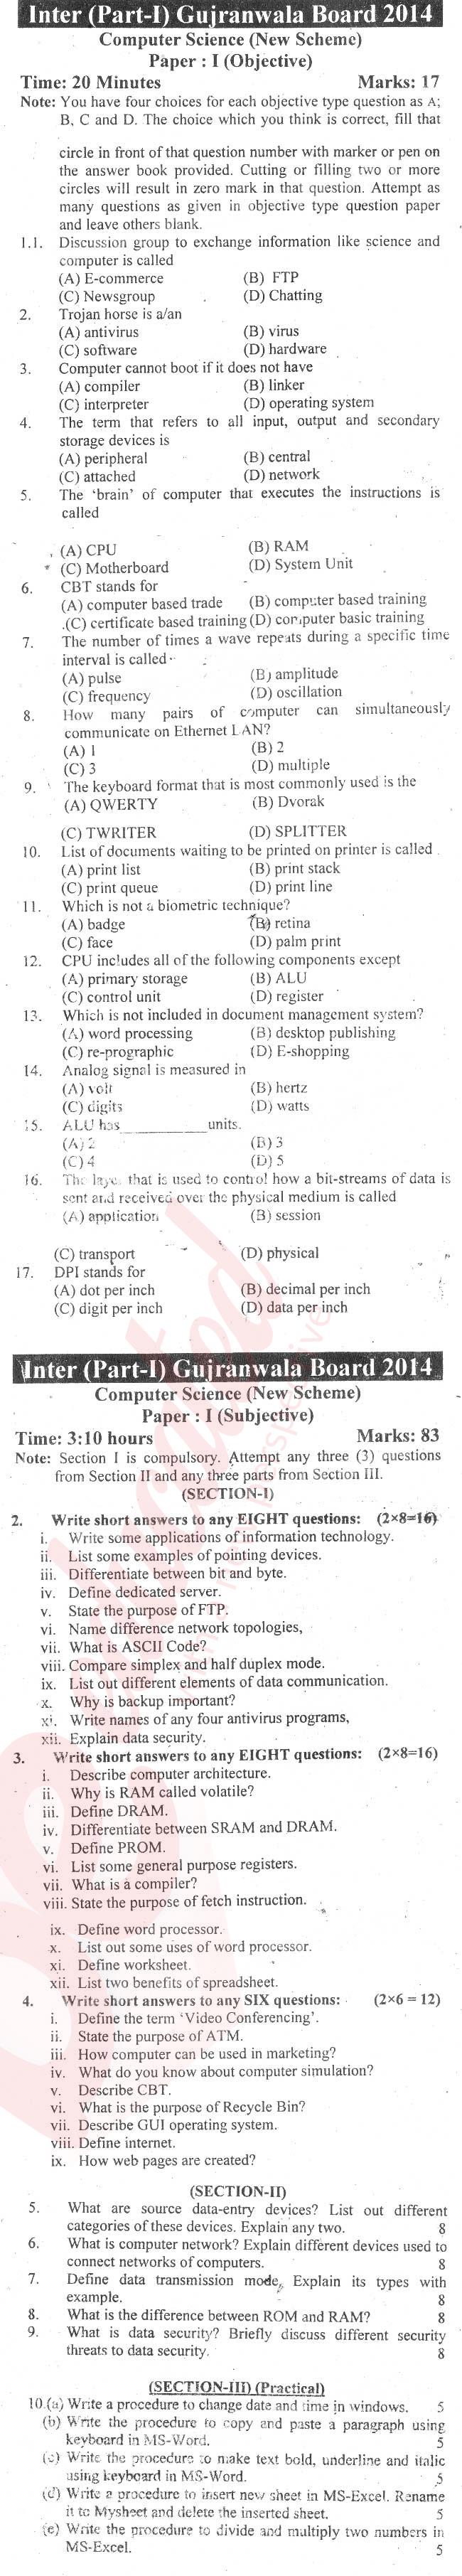 Computer Science ICS Part 1 Past Paper Group 1 BISE Gujranwala 2014